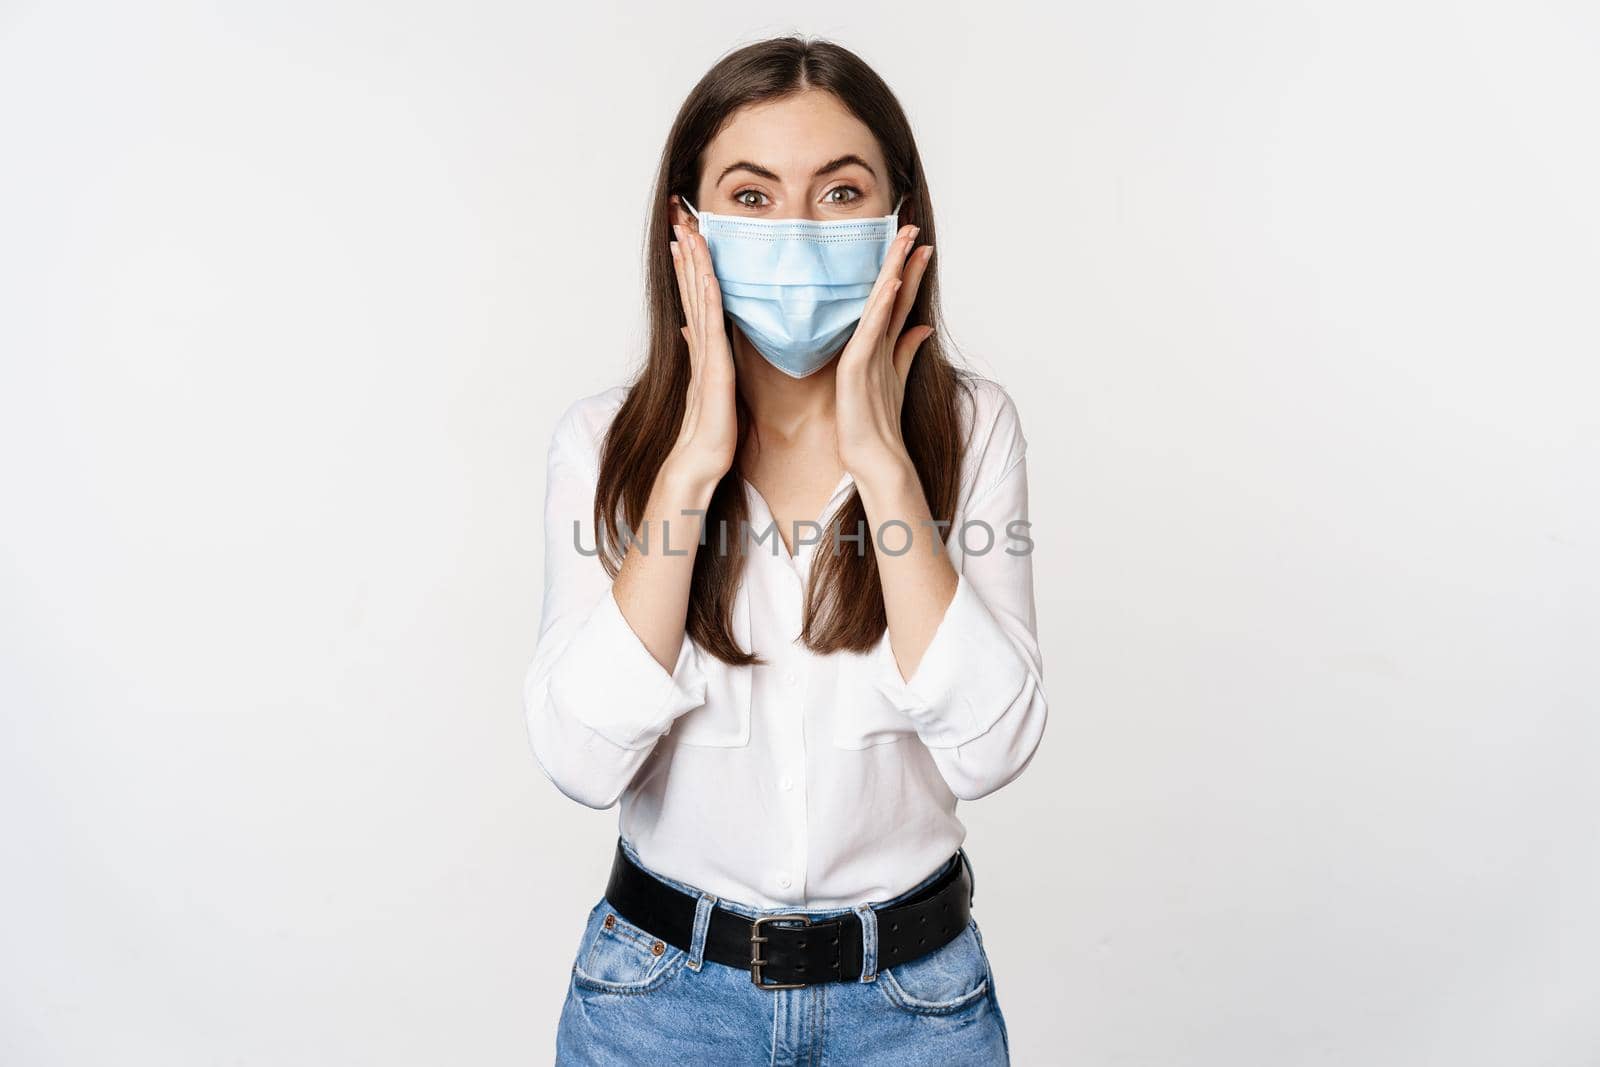 Surprised woman in face medical mask looking amazed, checking out awesome news, big reveal, standing over white background.